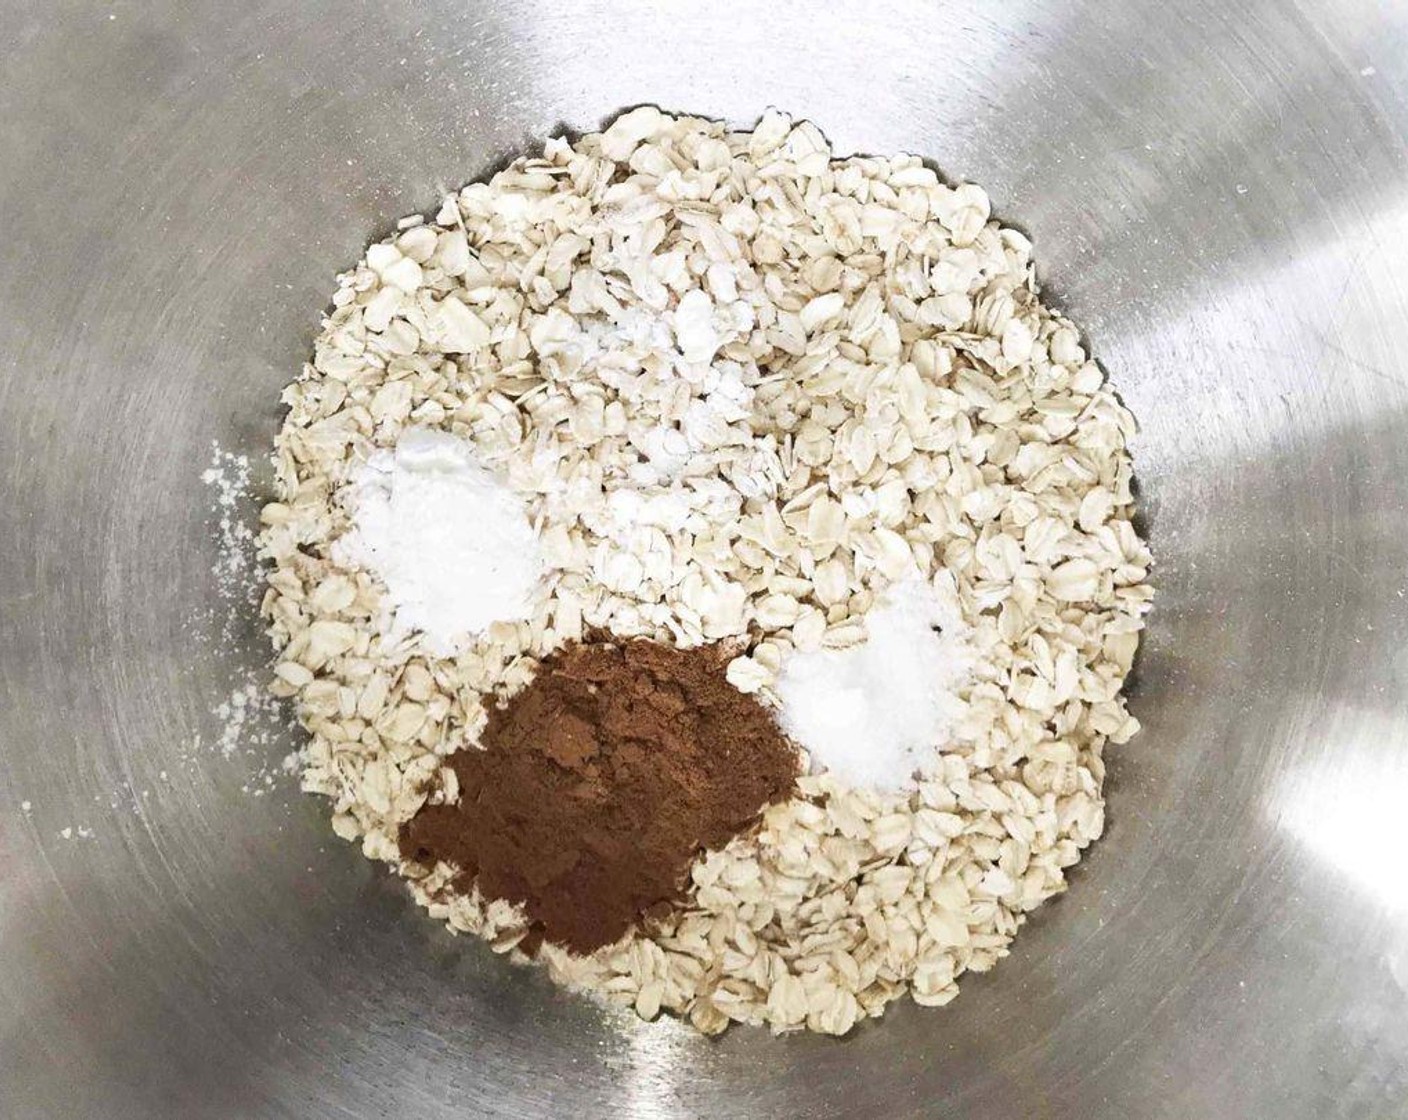 step 2 In a medium-size bowl, mix together the Old Fashioned Rolled Oats (2 cups), Baking Powder (1 tsp), Ground Cinnamon (1/2 Tbsp), and Sea Salt (1/2 tsp). Set aside as well.